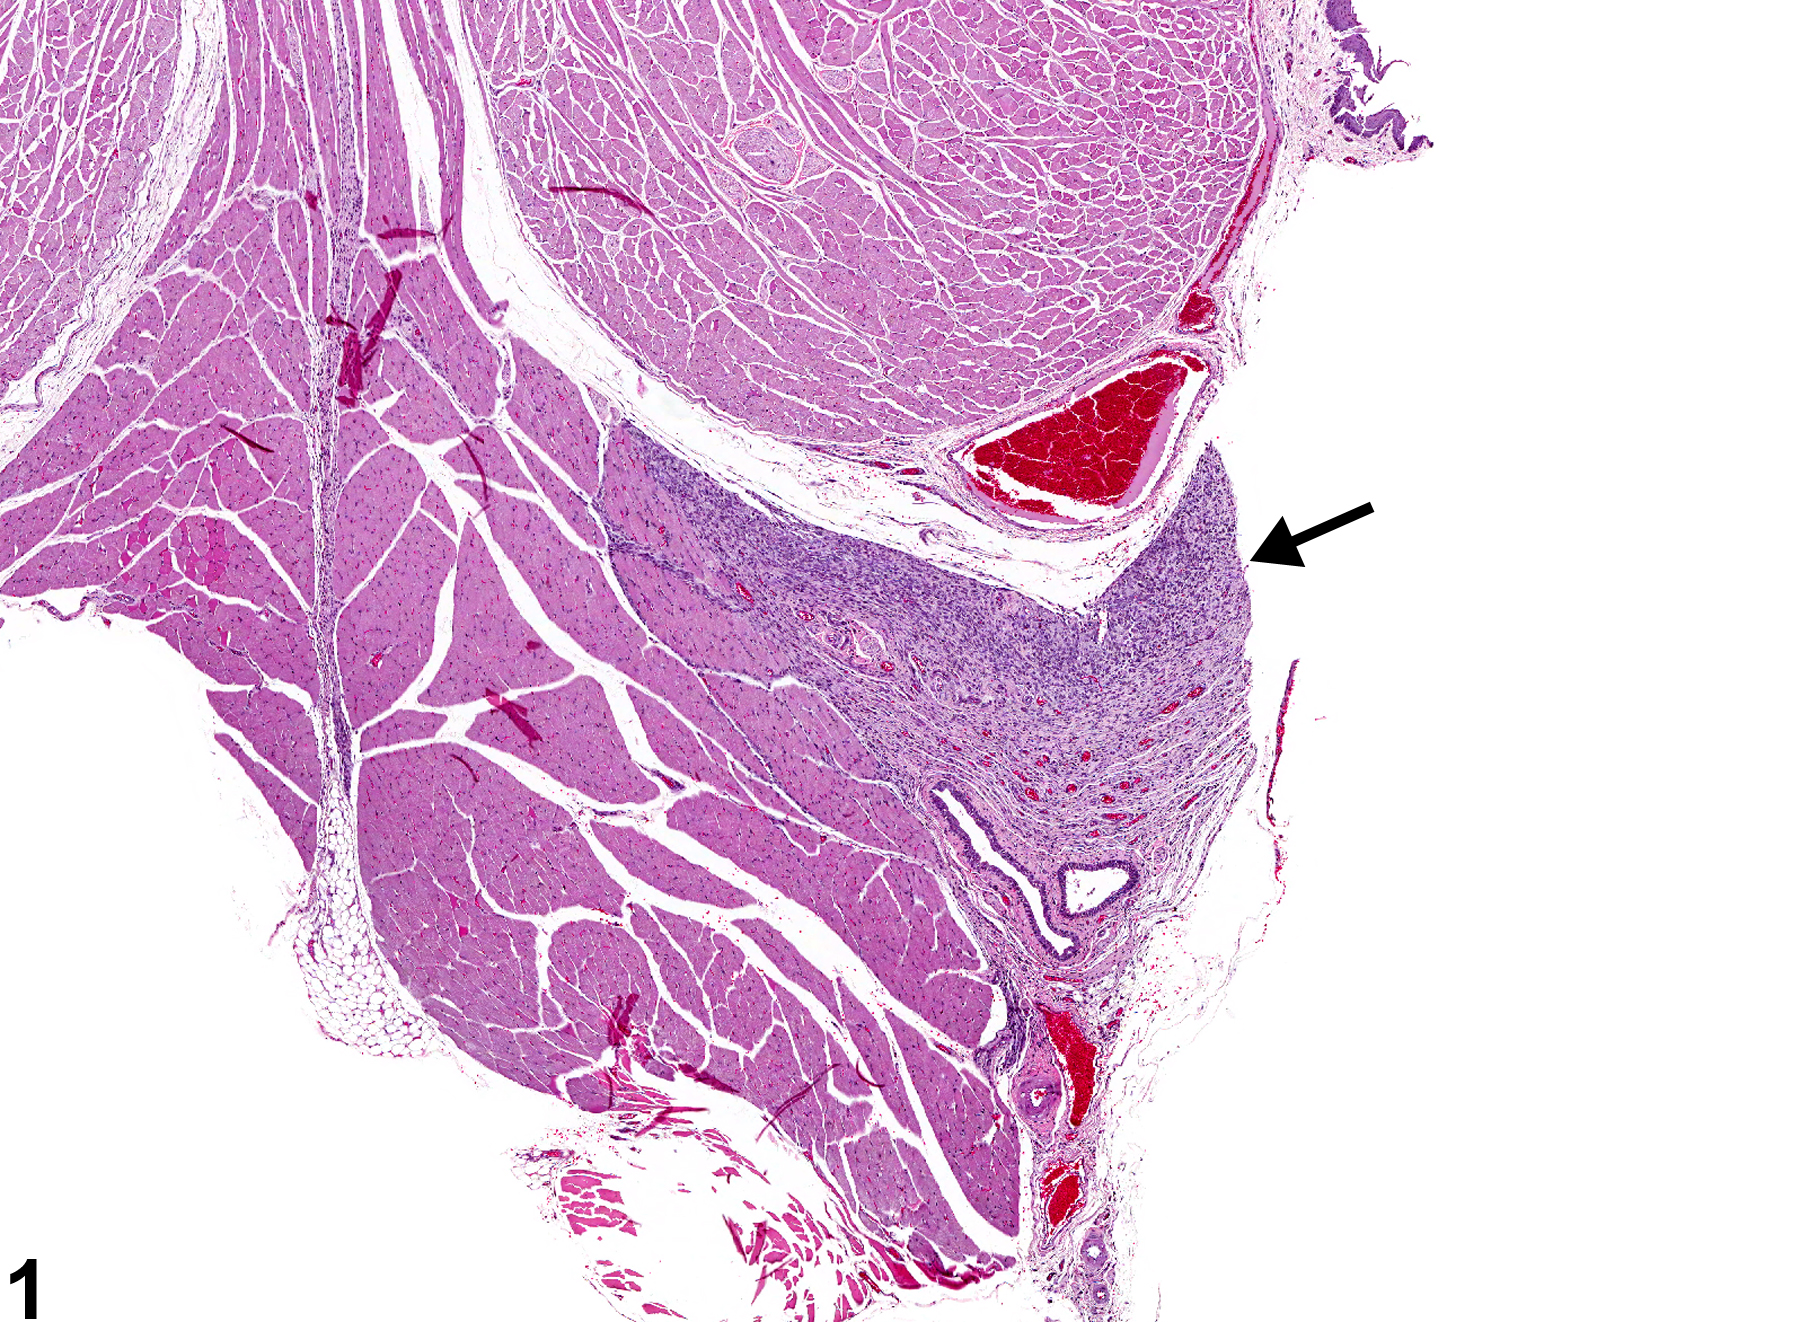 Image of fibrosis in the tongue from a male F344/N rat in a subchronic study